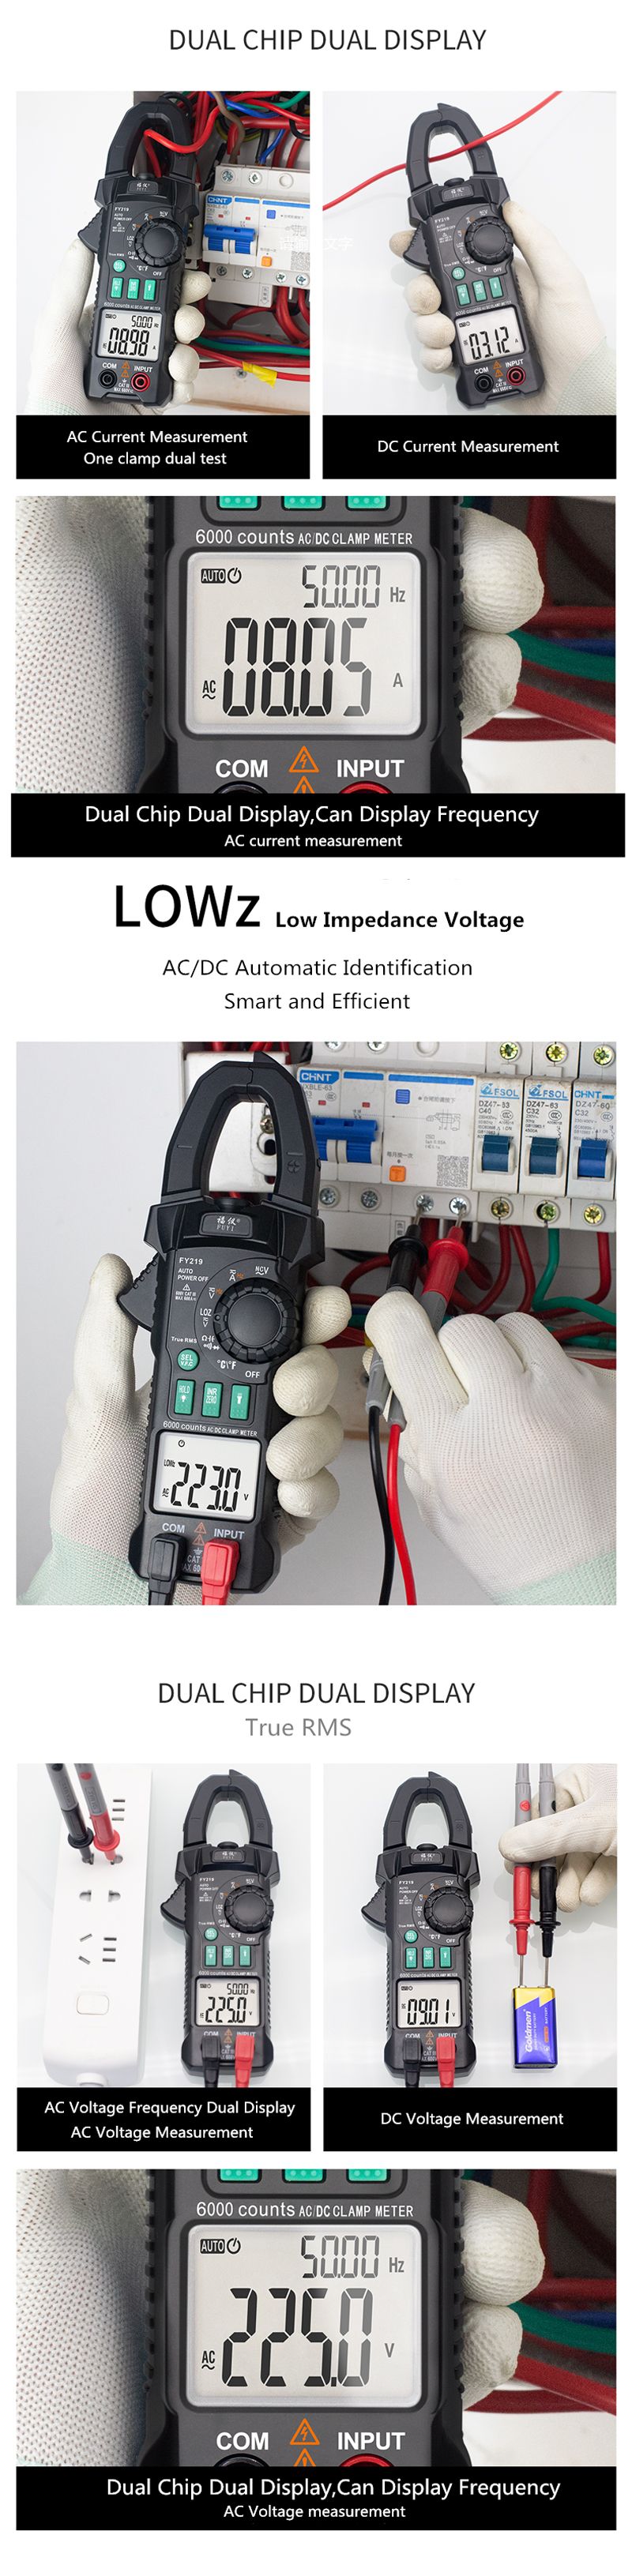 FUYI-FY219-Double-Display-ACDC-True-RMS-Digital-Clamp-Meter-Portable-Multimeter-Voltage-Current-Mete-1627563